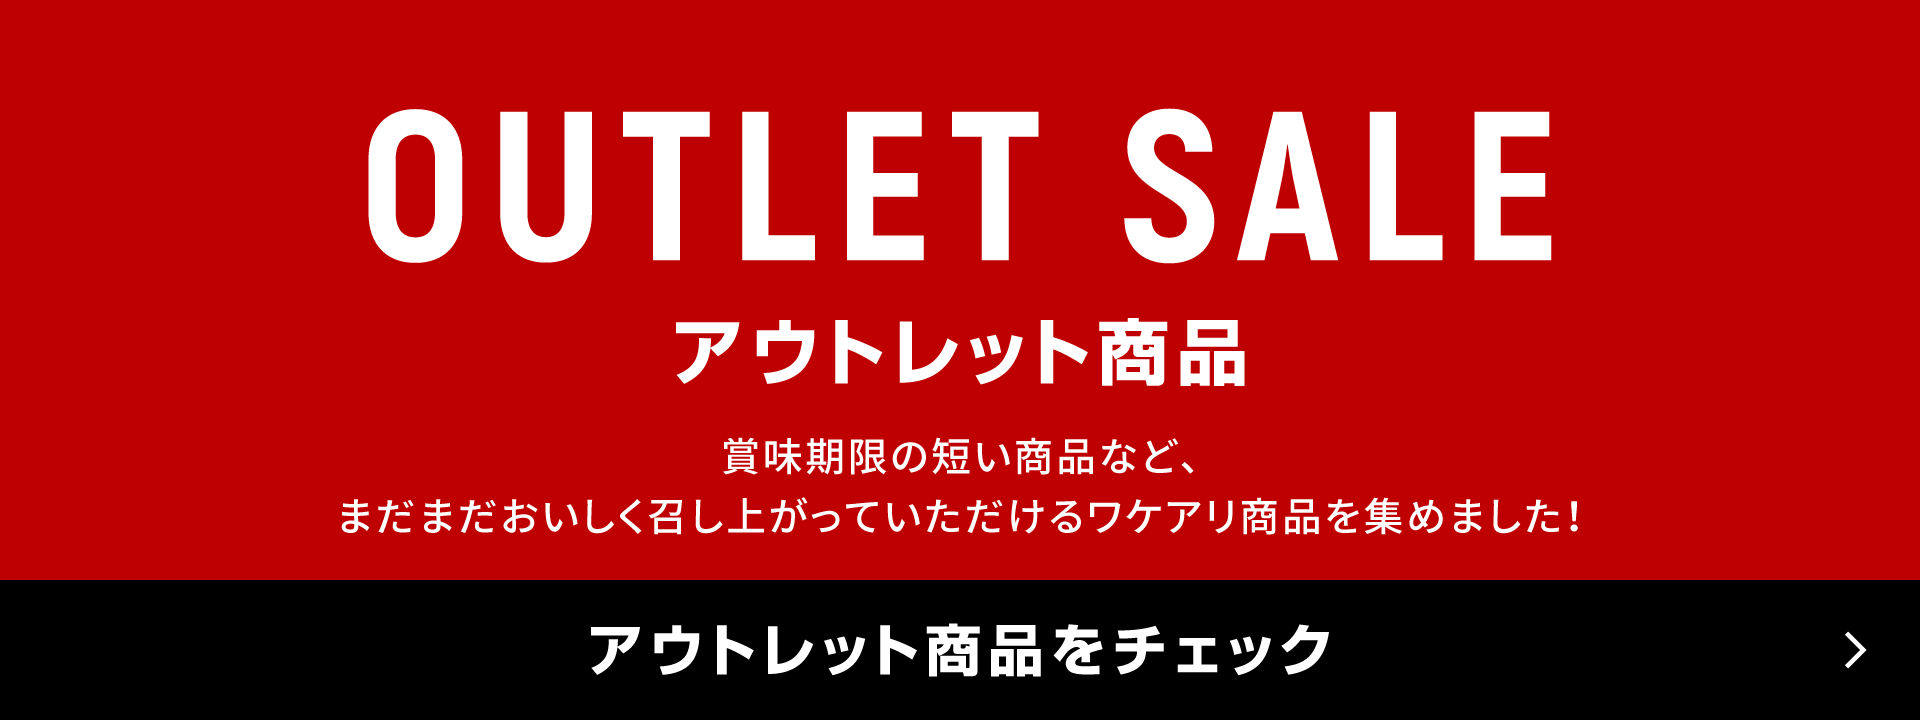 OUTLET SALE アウトレット商品